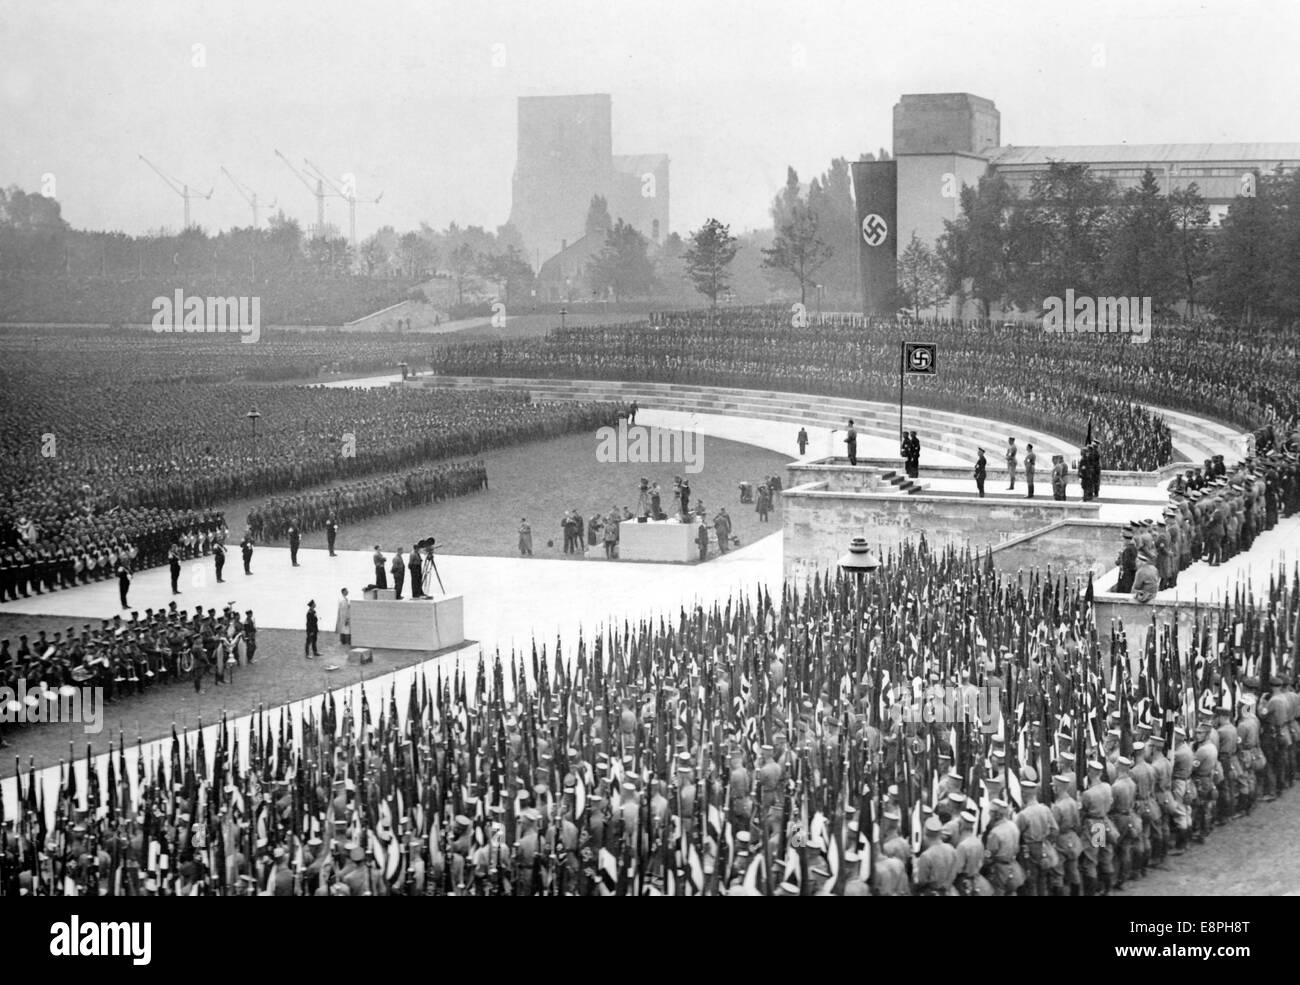 Nuremberg Rally 1937 in Nuremberg, Germany - Nazi party rally grounds - View of Luitpoldarena during a speech by Adolf Hitler (on the tribune) to units of the Sturmtruppe (SA), Schutzstaffel (SS), National Socialist Motor Corps (NSKK) and National Socialist Flyers Corps (NSFK). (Flaws in quality due to the historic picture copy) Fotoarchiv für Zeitgeschichtee - NO WIRE SERVICE - Stock Photo